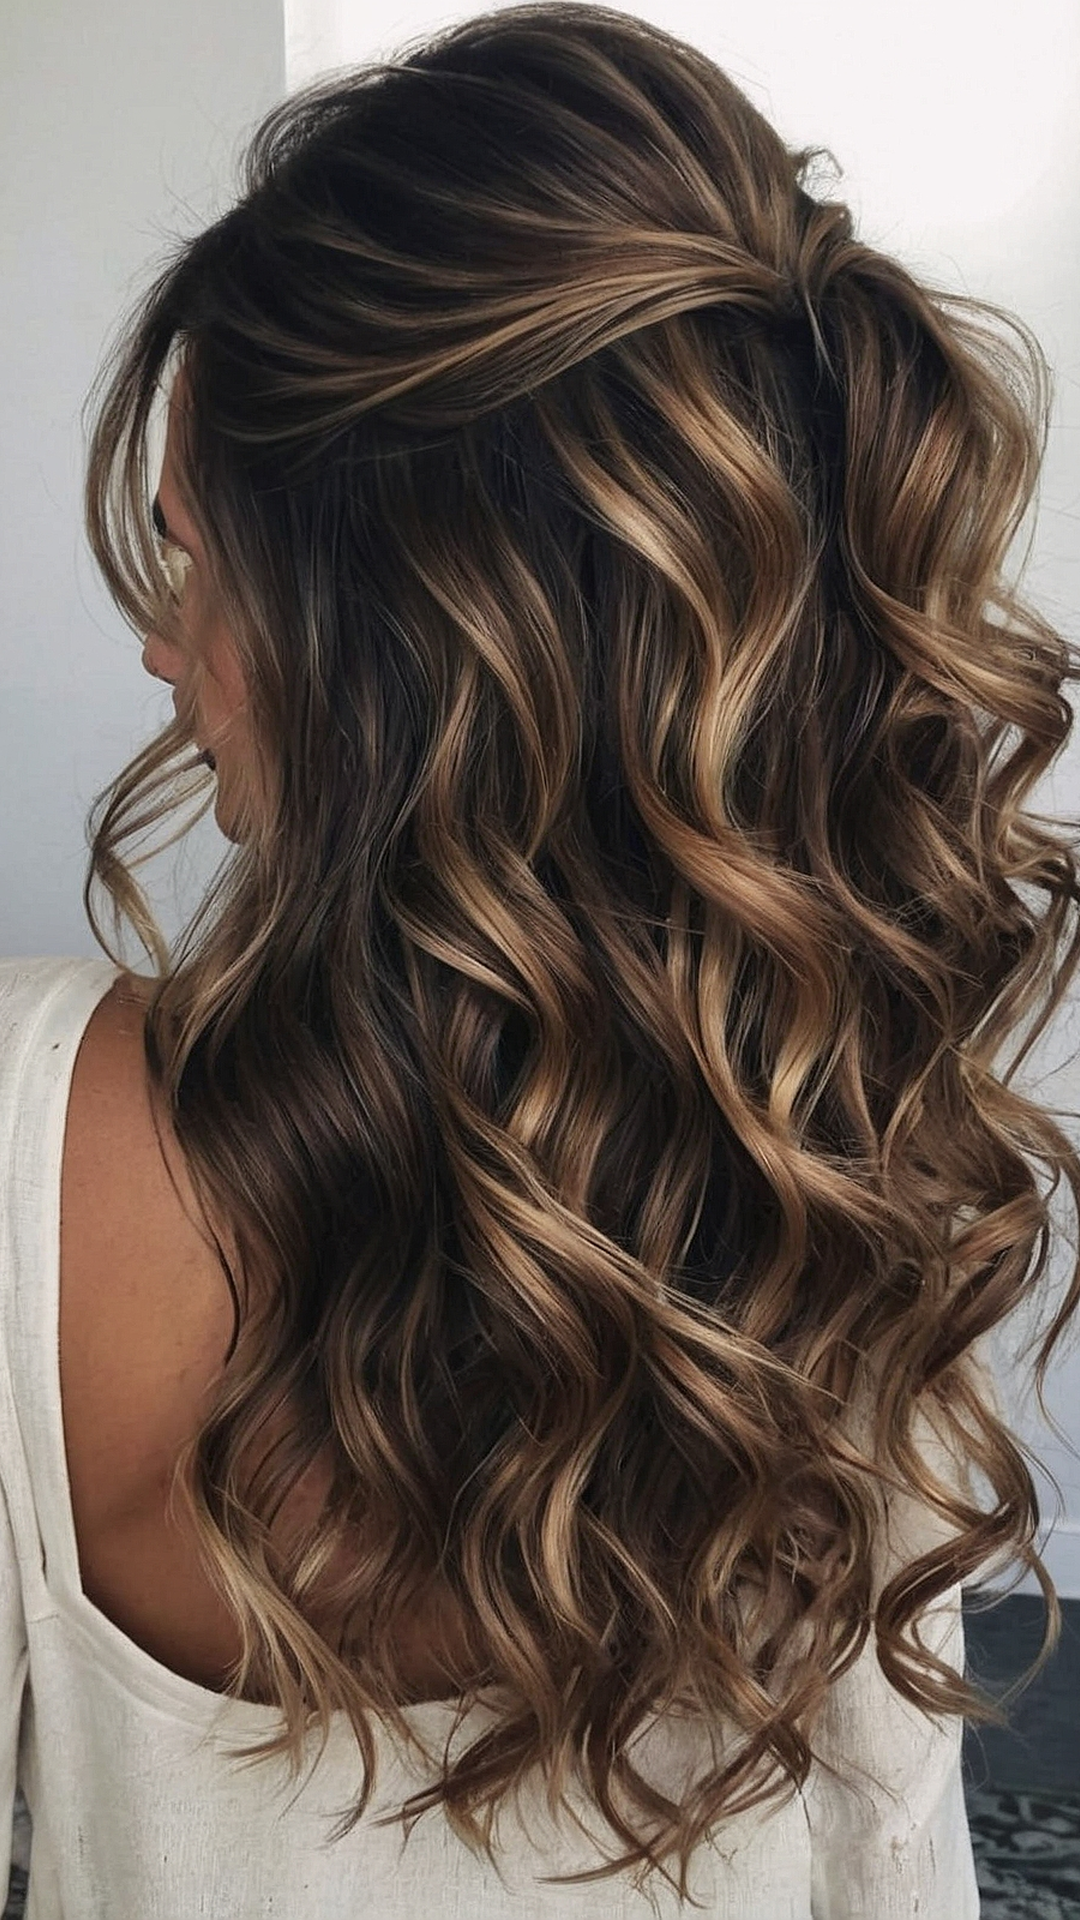 Waves of Beauty: Creative Wavy Hairstyle Designs